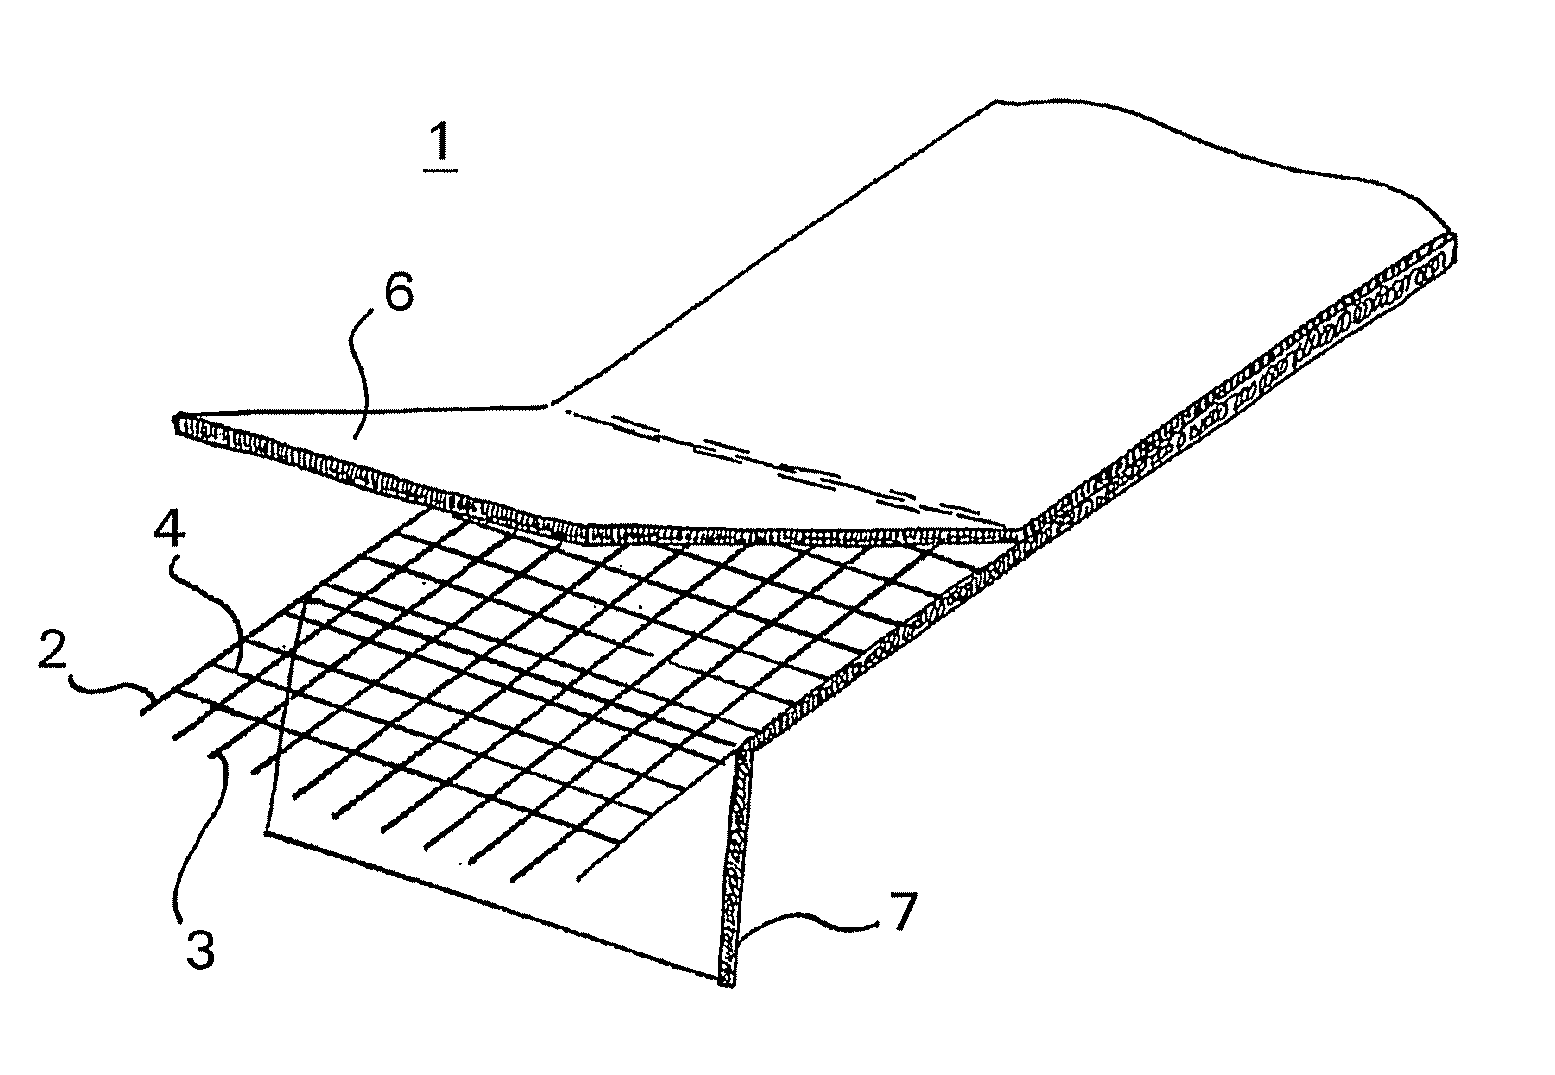 Method for manufacturing a textile composite intended for mechanical reinforcement of a bitumen-based waterproof coating